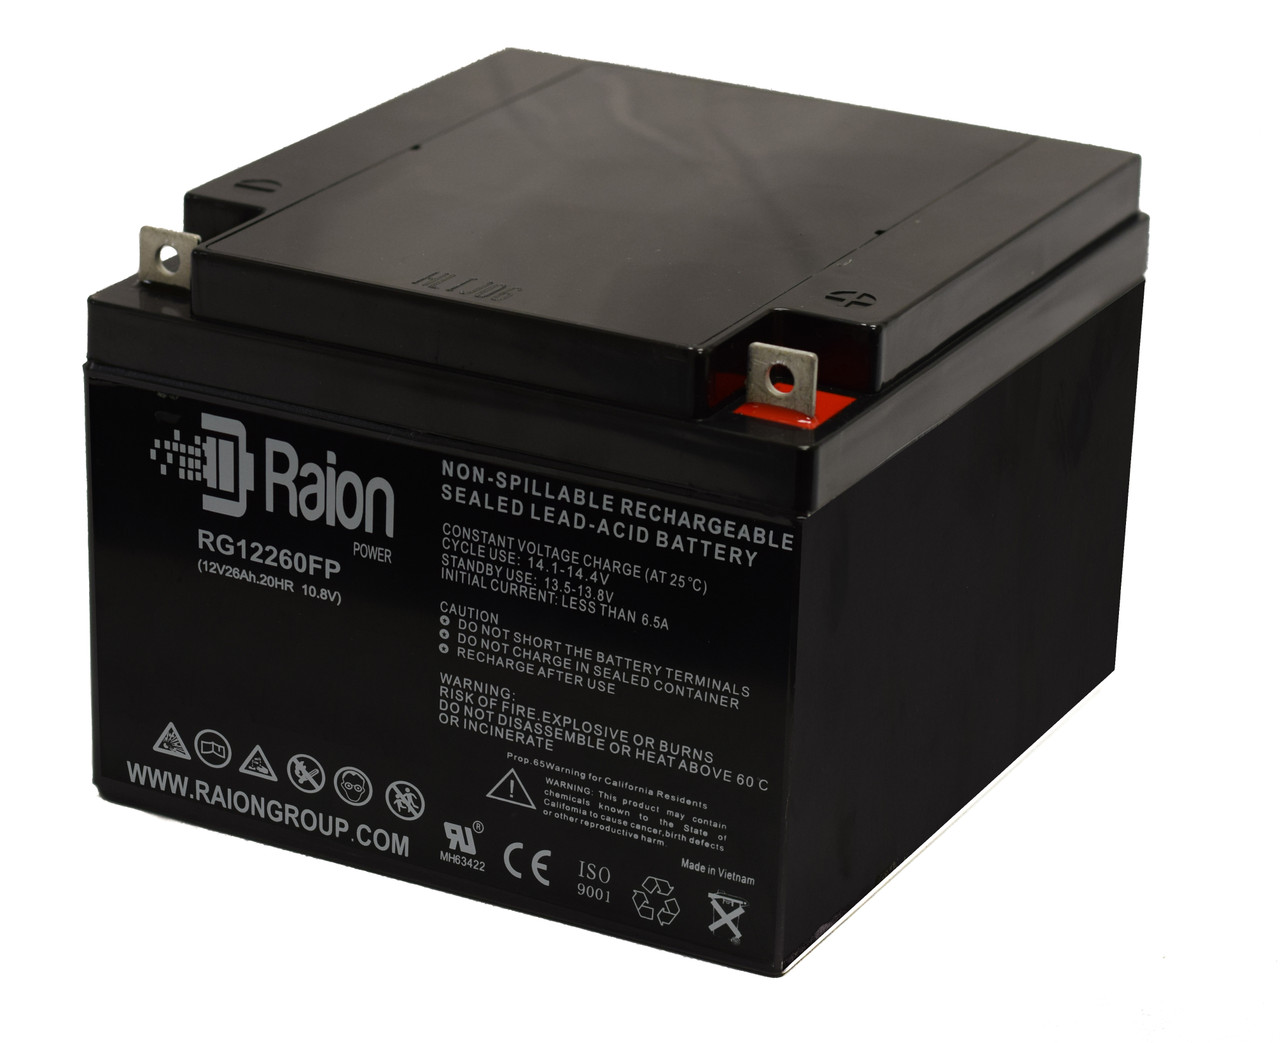 Raion Power Replacement 12V 26Ah Battery for Kobe HF28-12A - 1 Pack